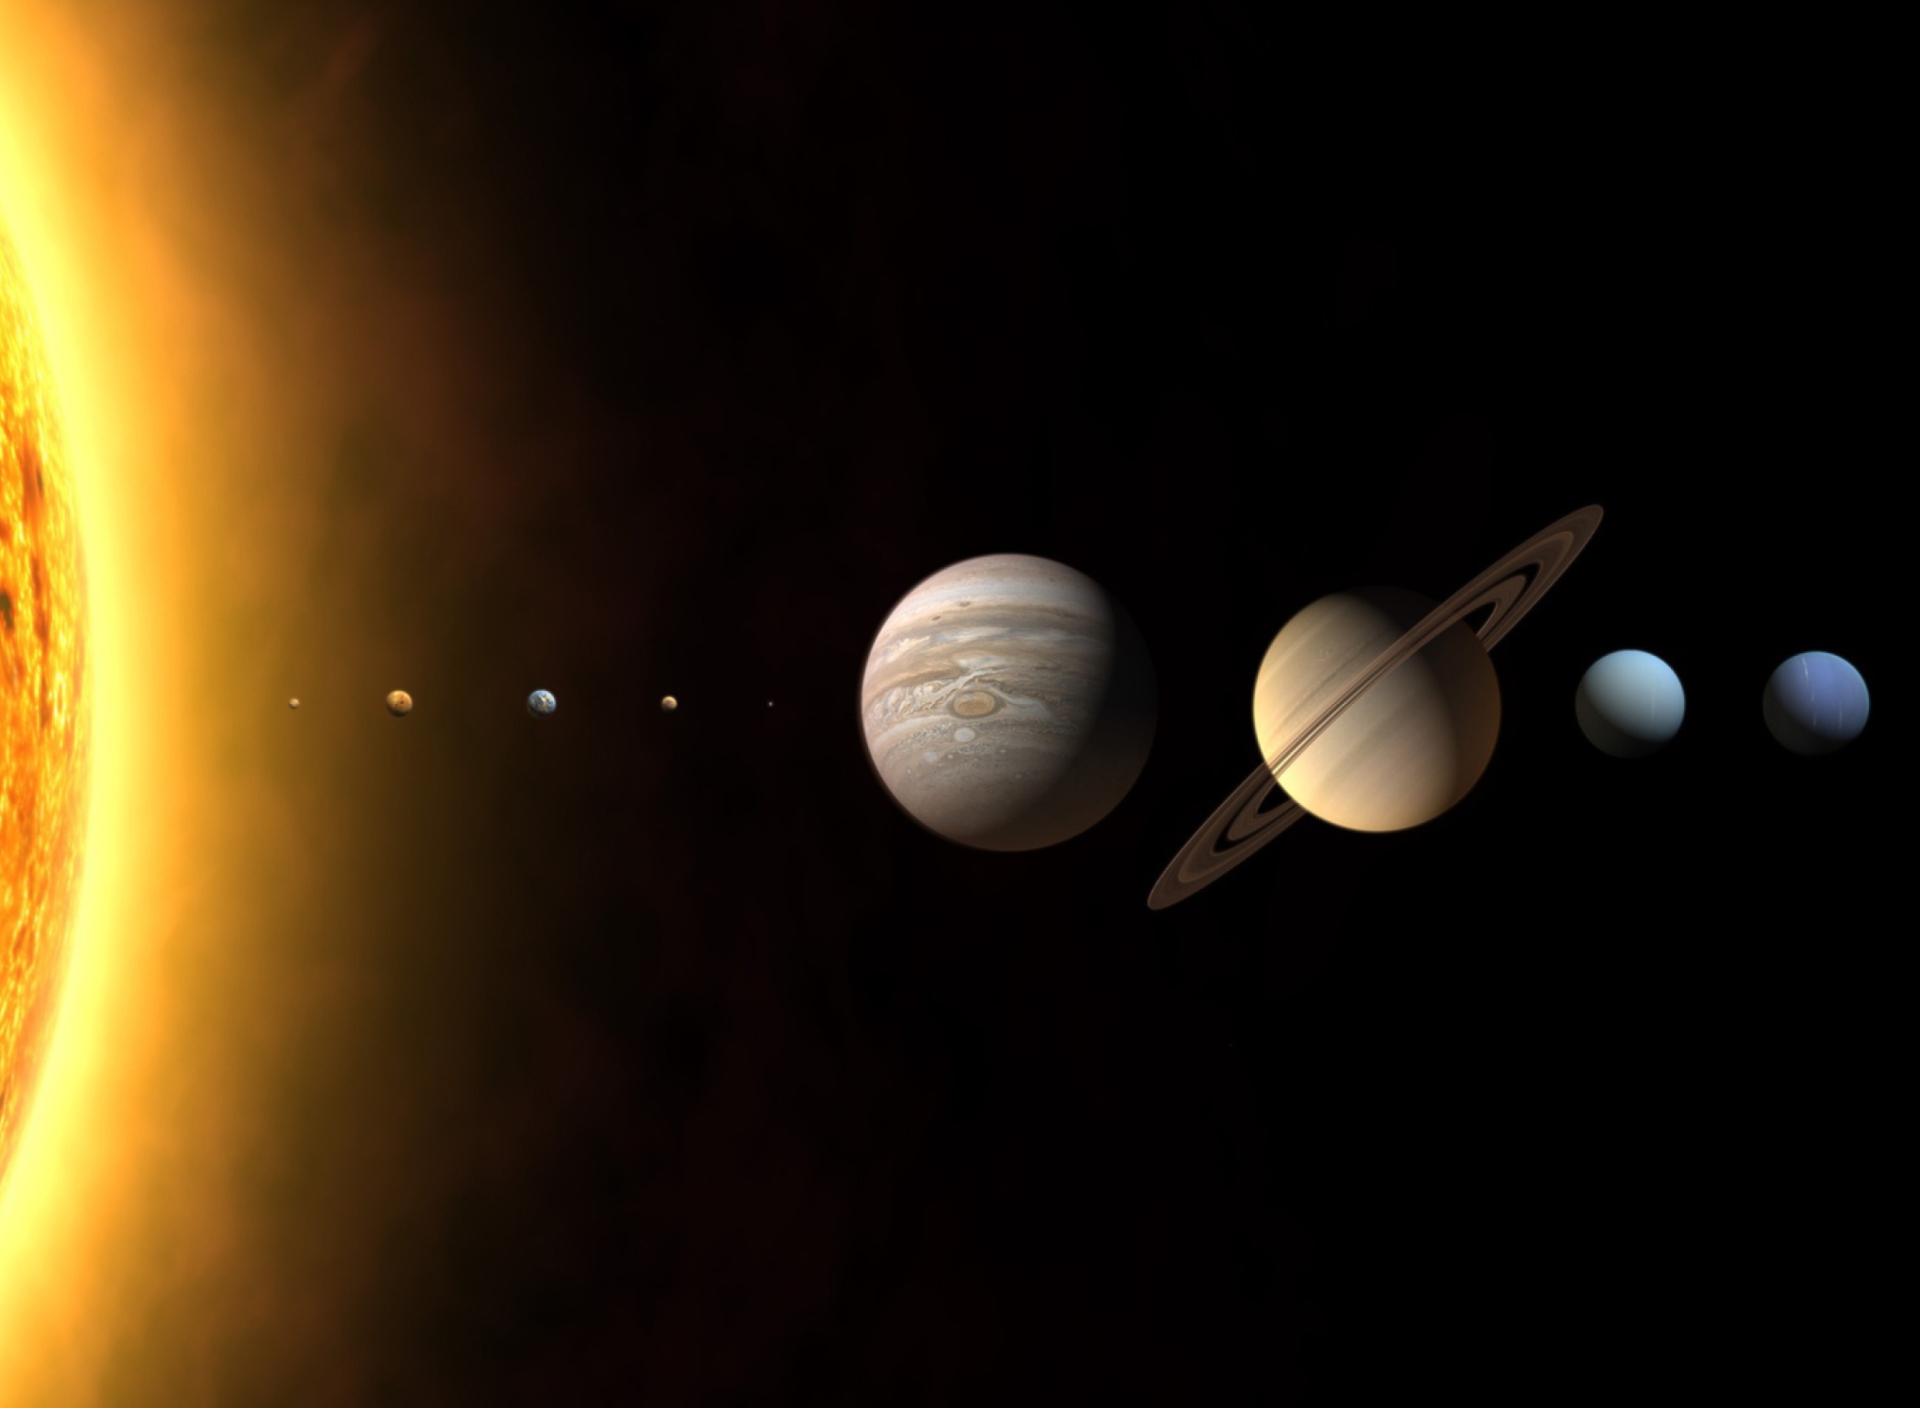 Planets And Space wallpaper 1920x1408